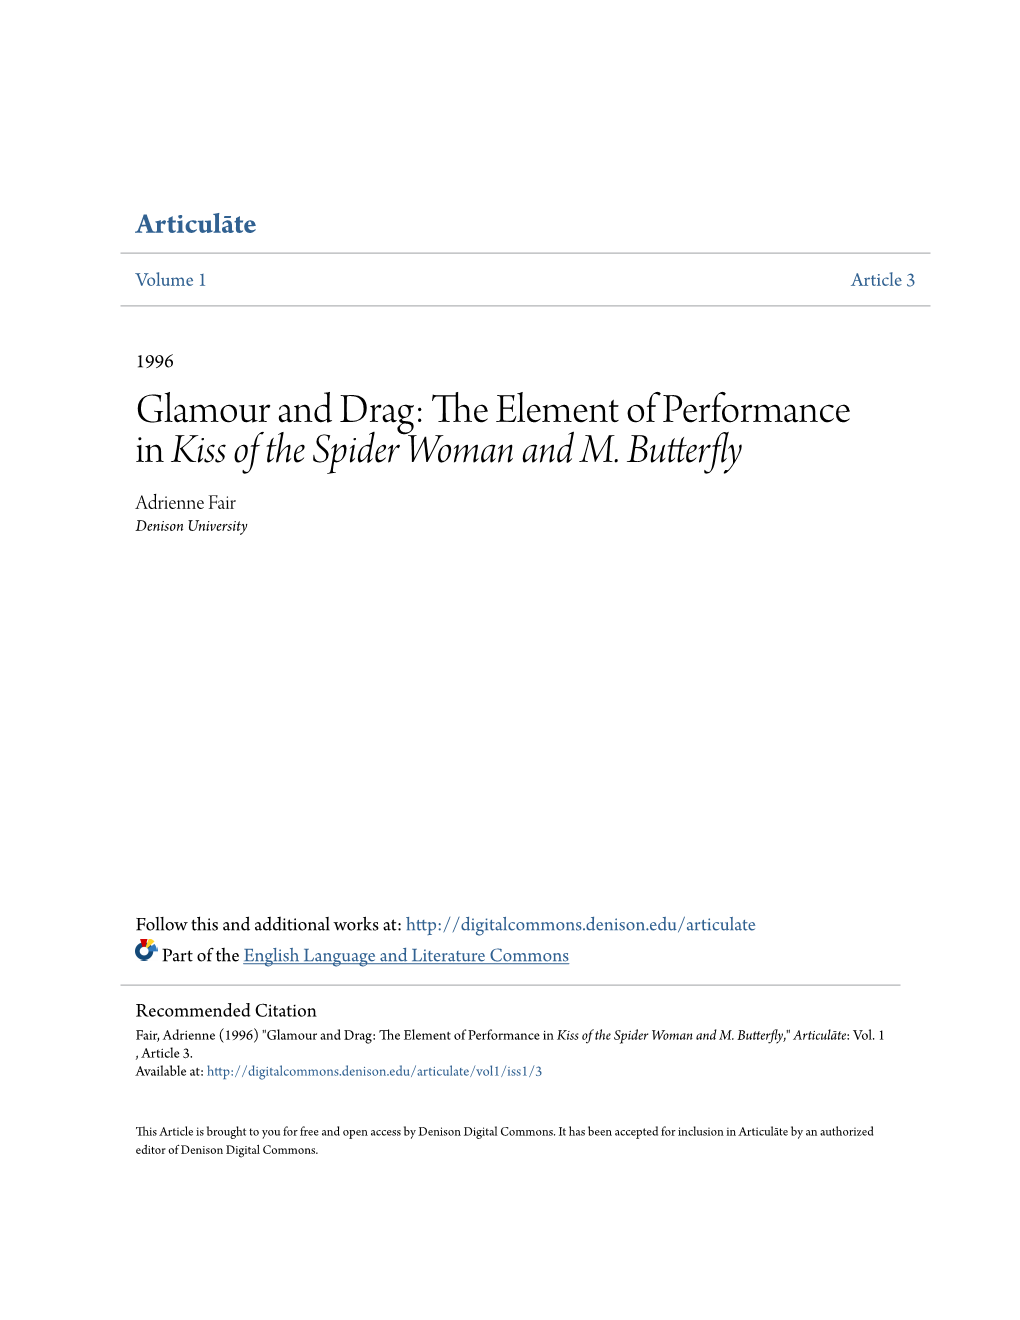 The Element of Performance in Kiss of the Spider Woman and M. Butterfly," Articulāte: Vol